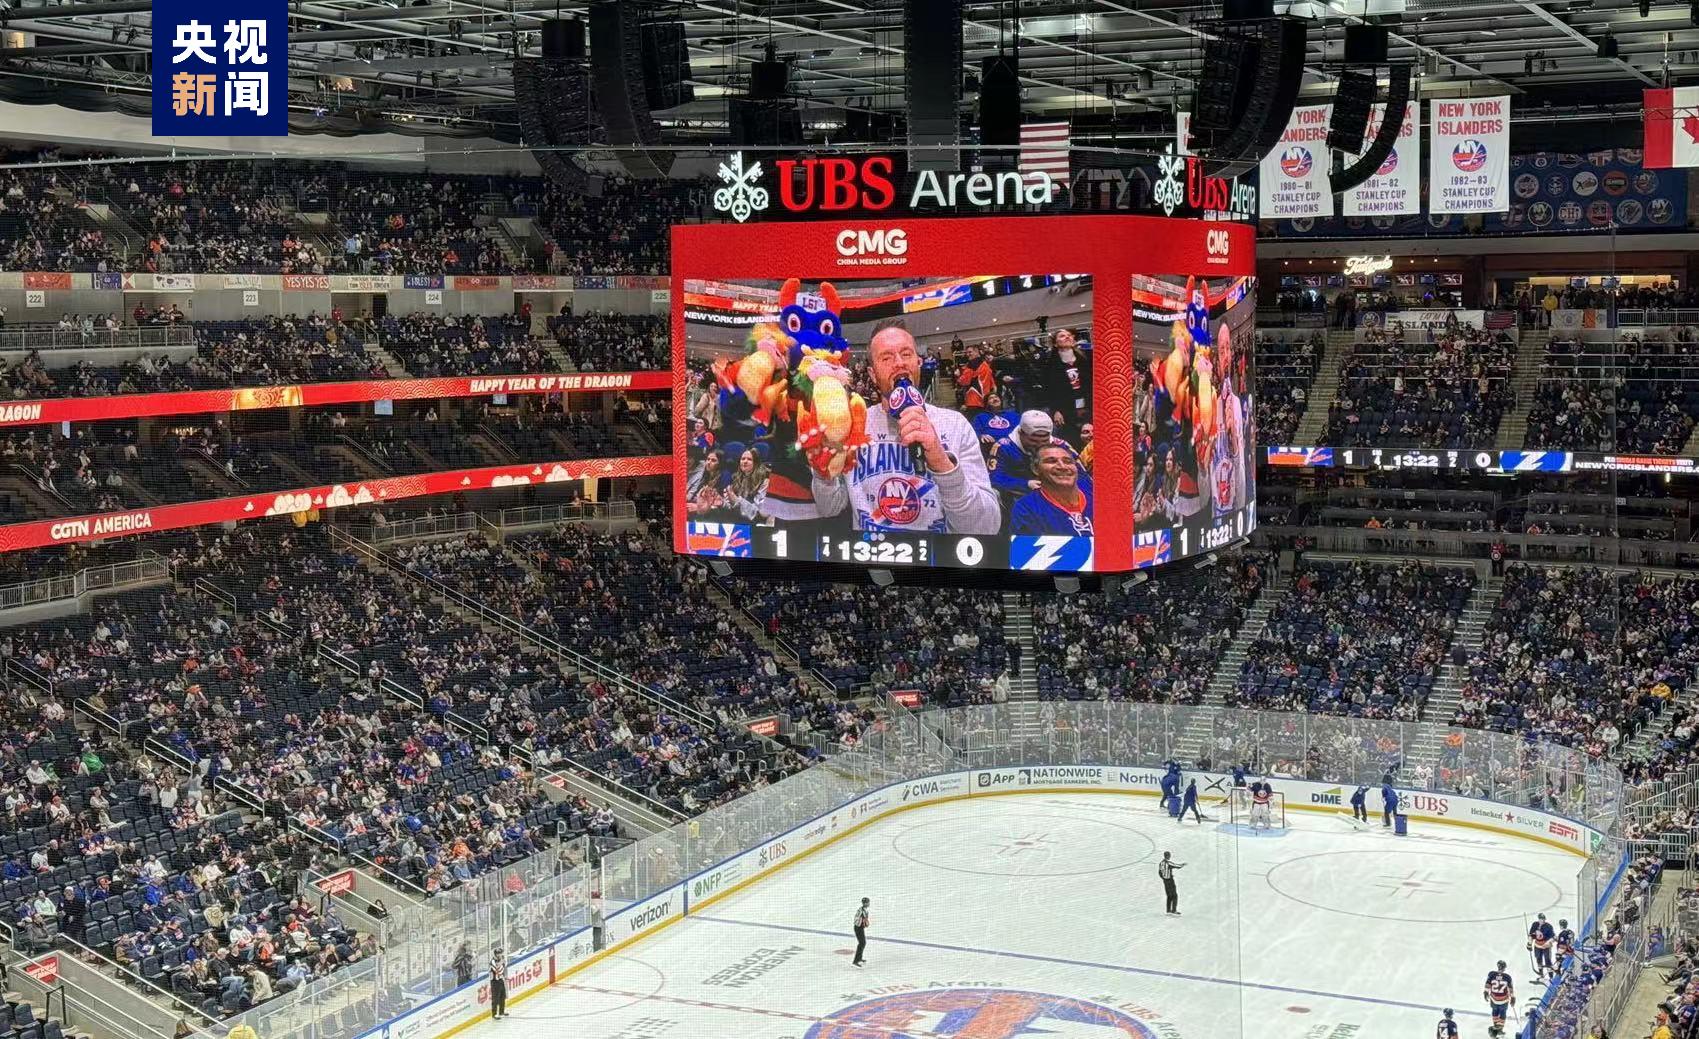 The big screens show a host and the New York Islanders' mascot Sparky the Dragon sending the gifts of 